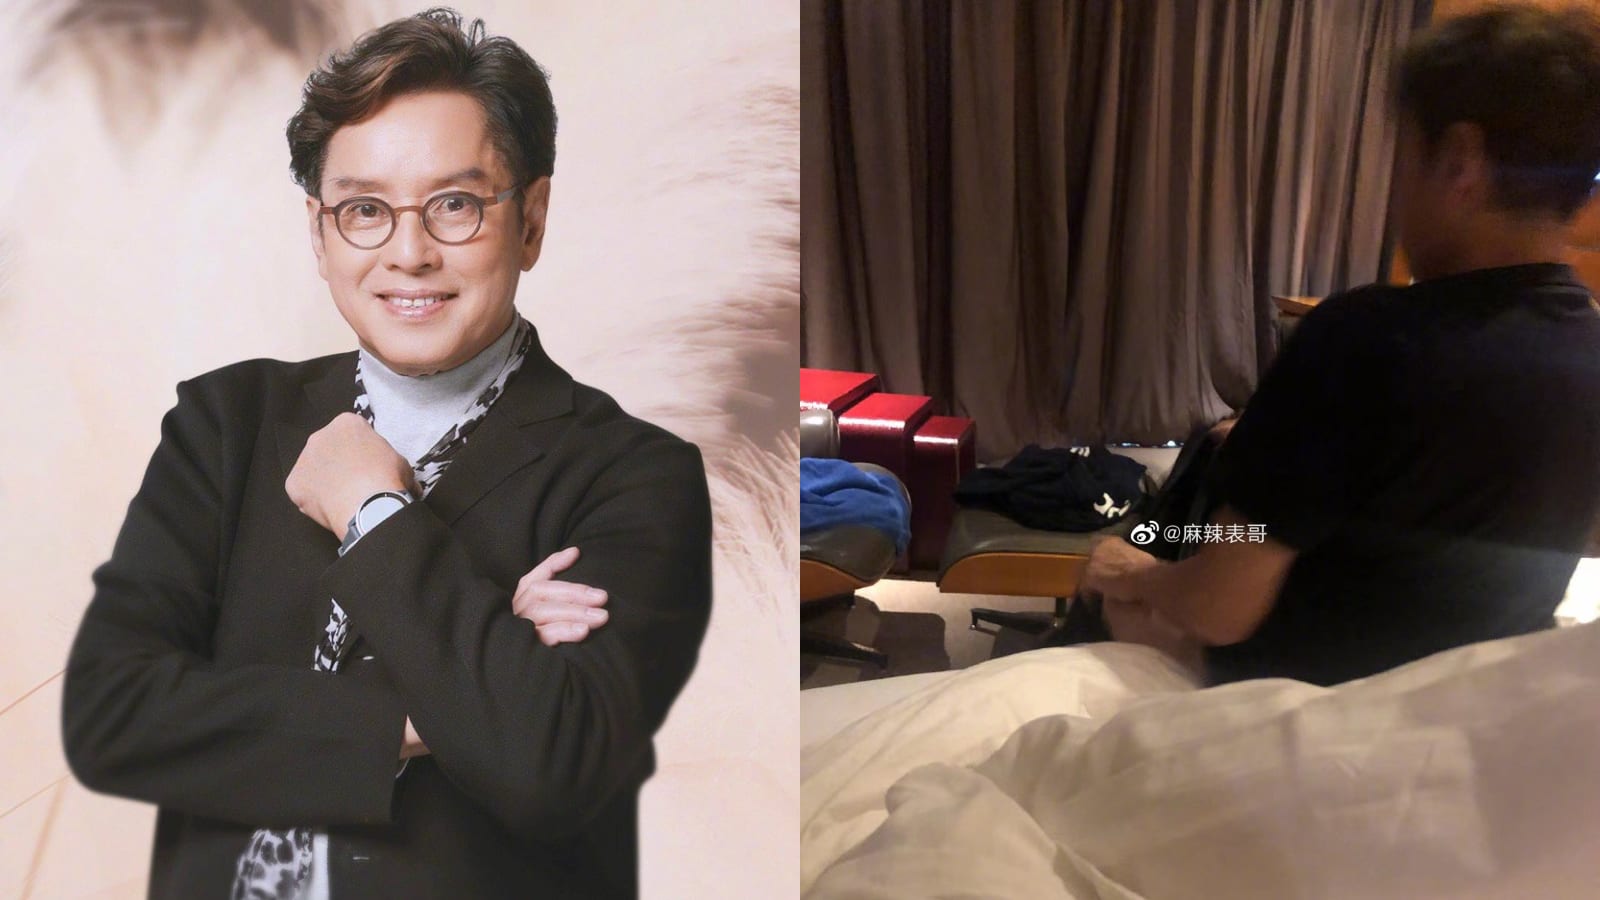 Netizen Who Accused Alan Tam, 71, Of Affair With Fan, 23, Doubles Down By Sharing More Pics; Takes “Legal Responsibility” For Posts